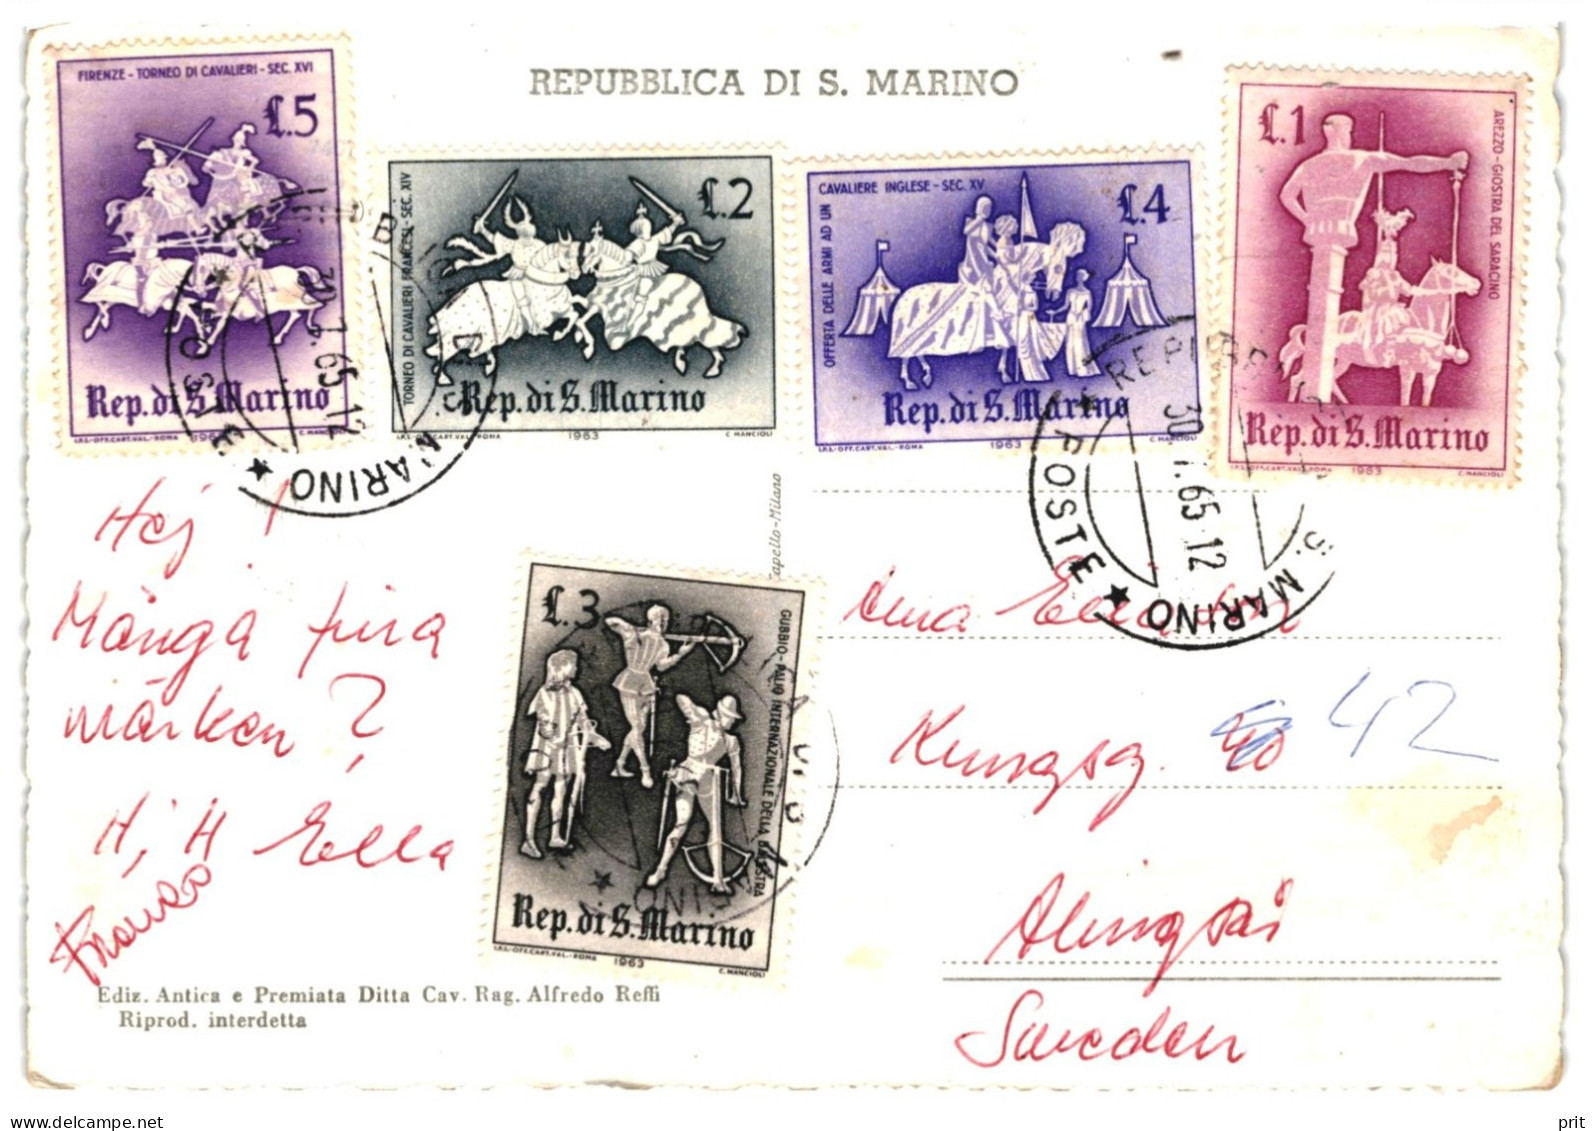 San Marino 1965 Used Postcard To Sweden, Medieval Tournaments Stamps 1963, Nice Postmarks, Fortress Of Guaita Postcard - Covers & Documents